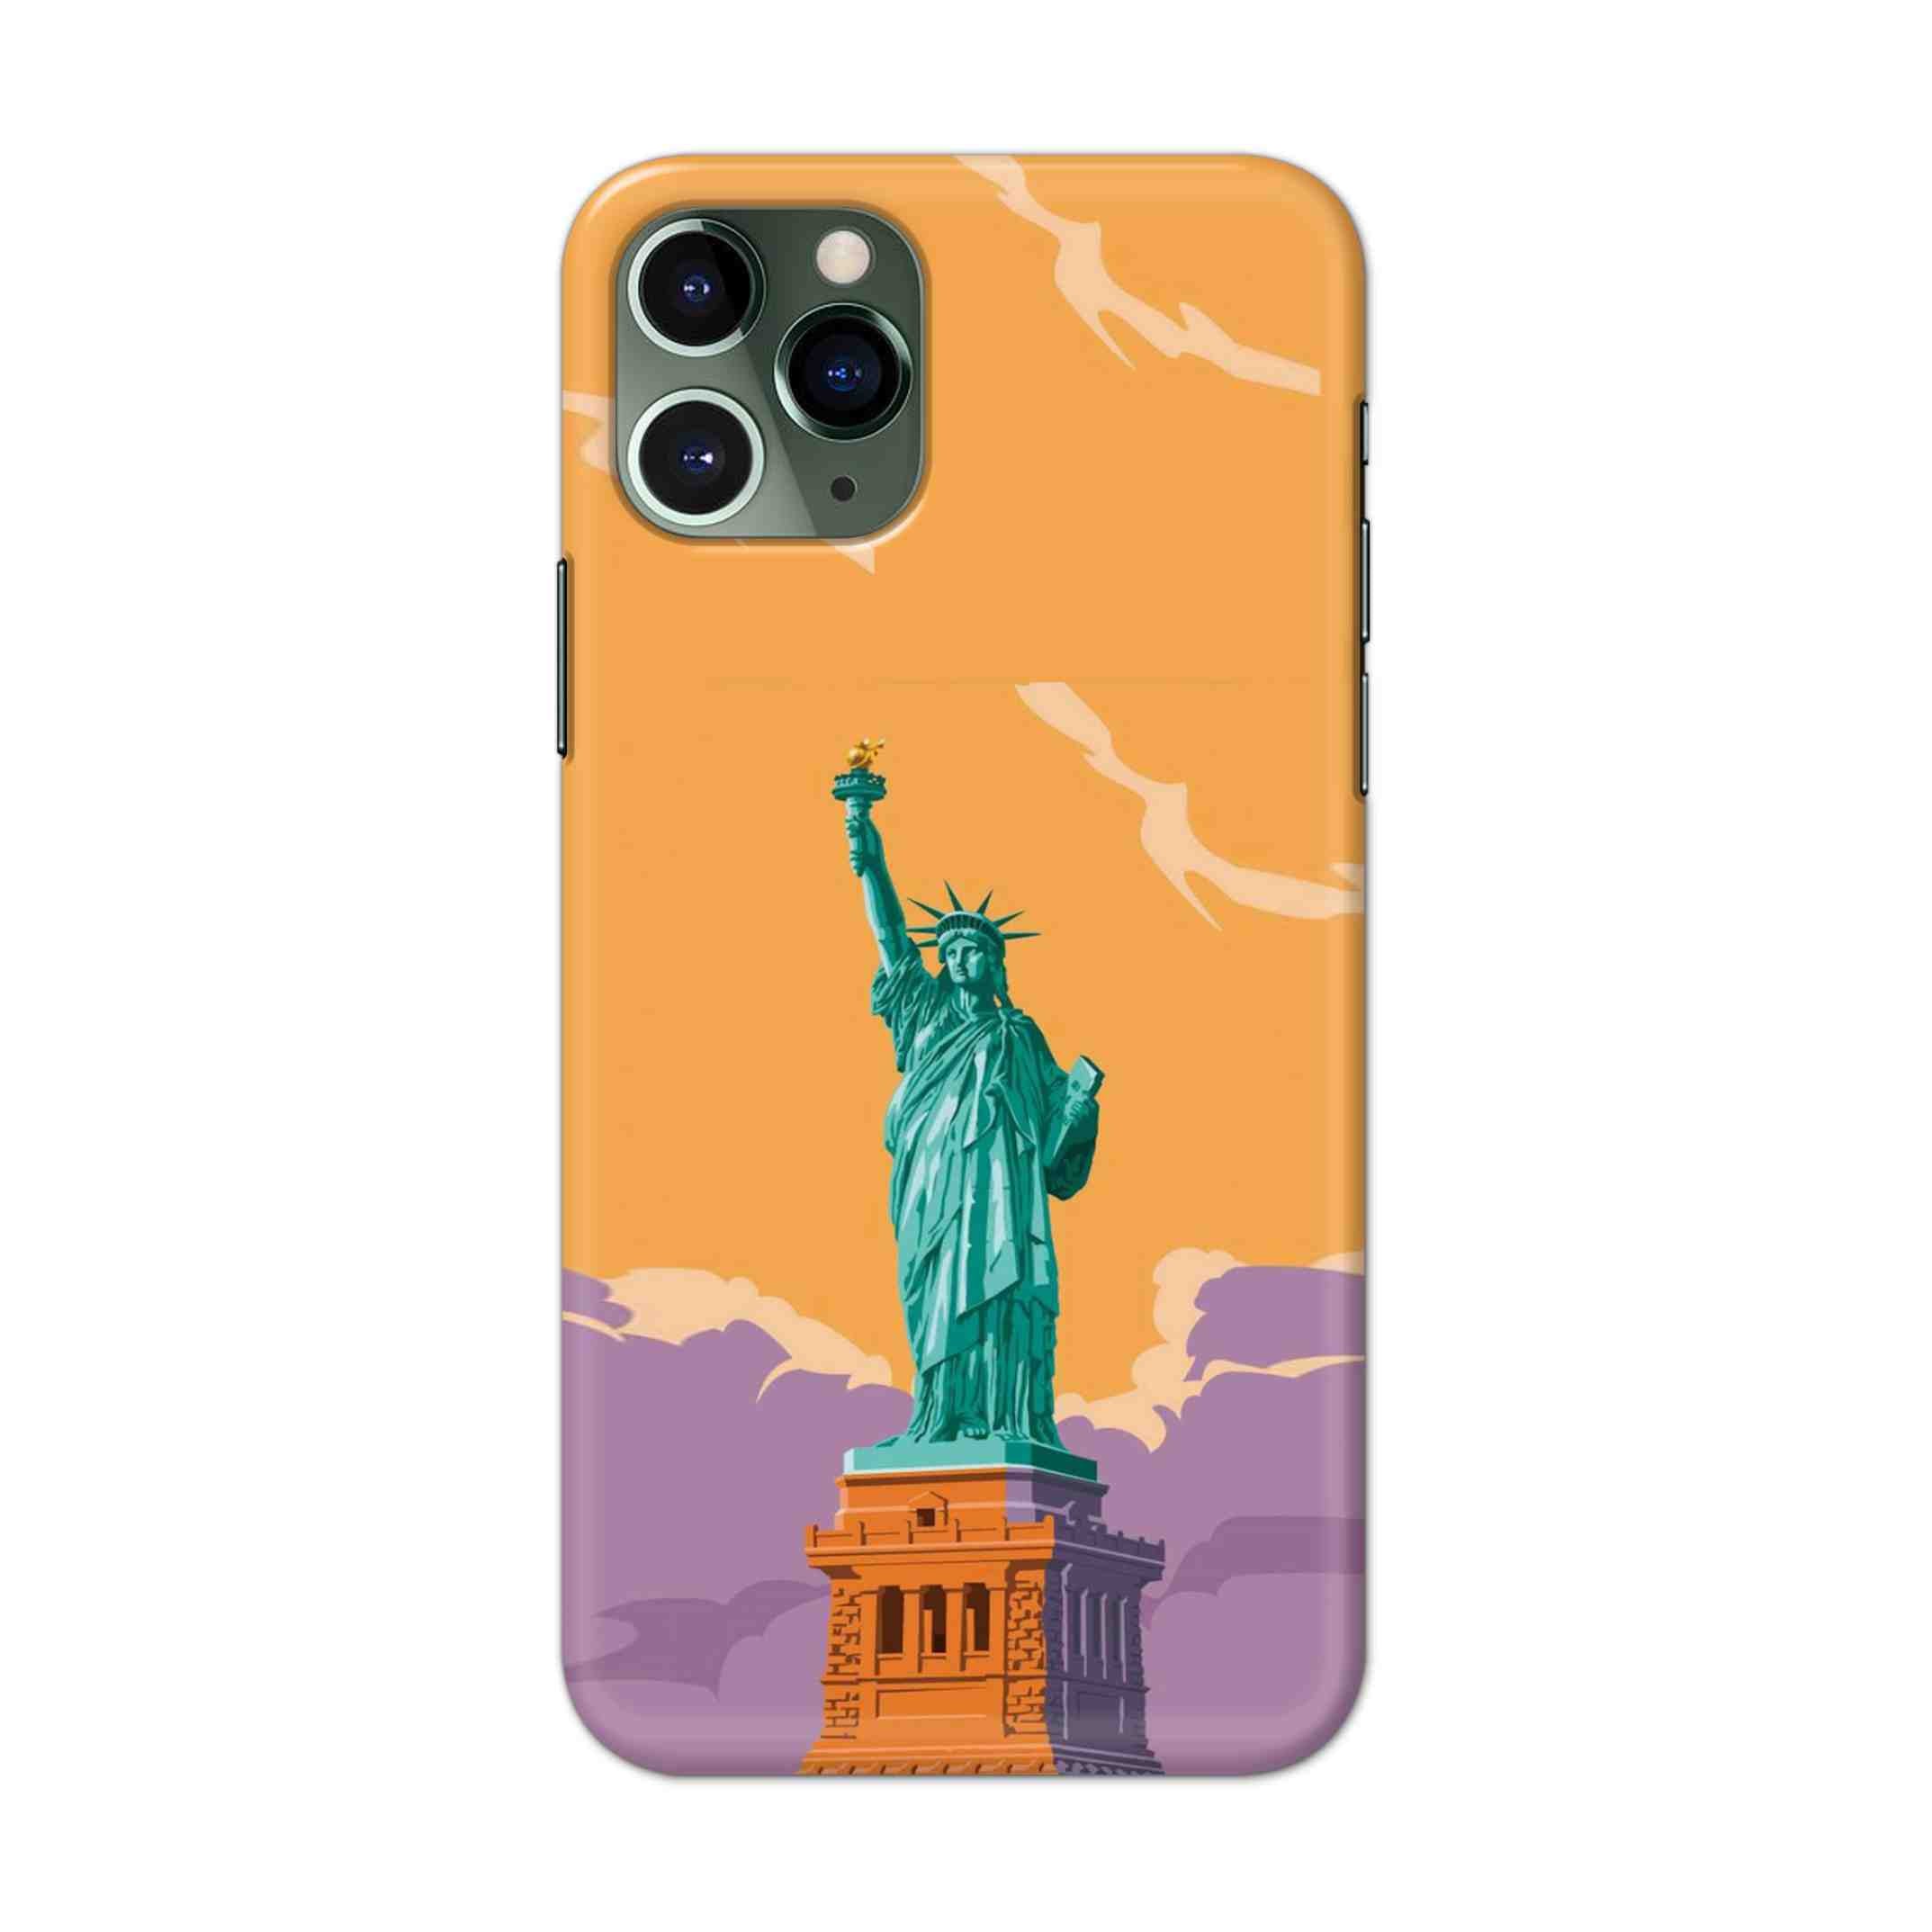 Buy Statue Of Liberty Hard Back Mobile Phone Case/Cover For iPhone 11 Pro Online